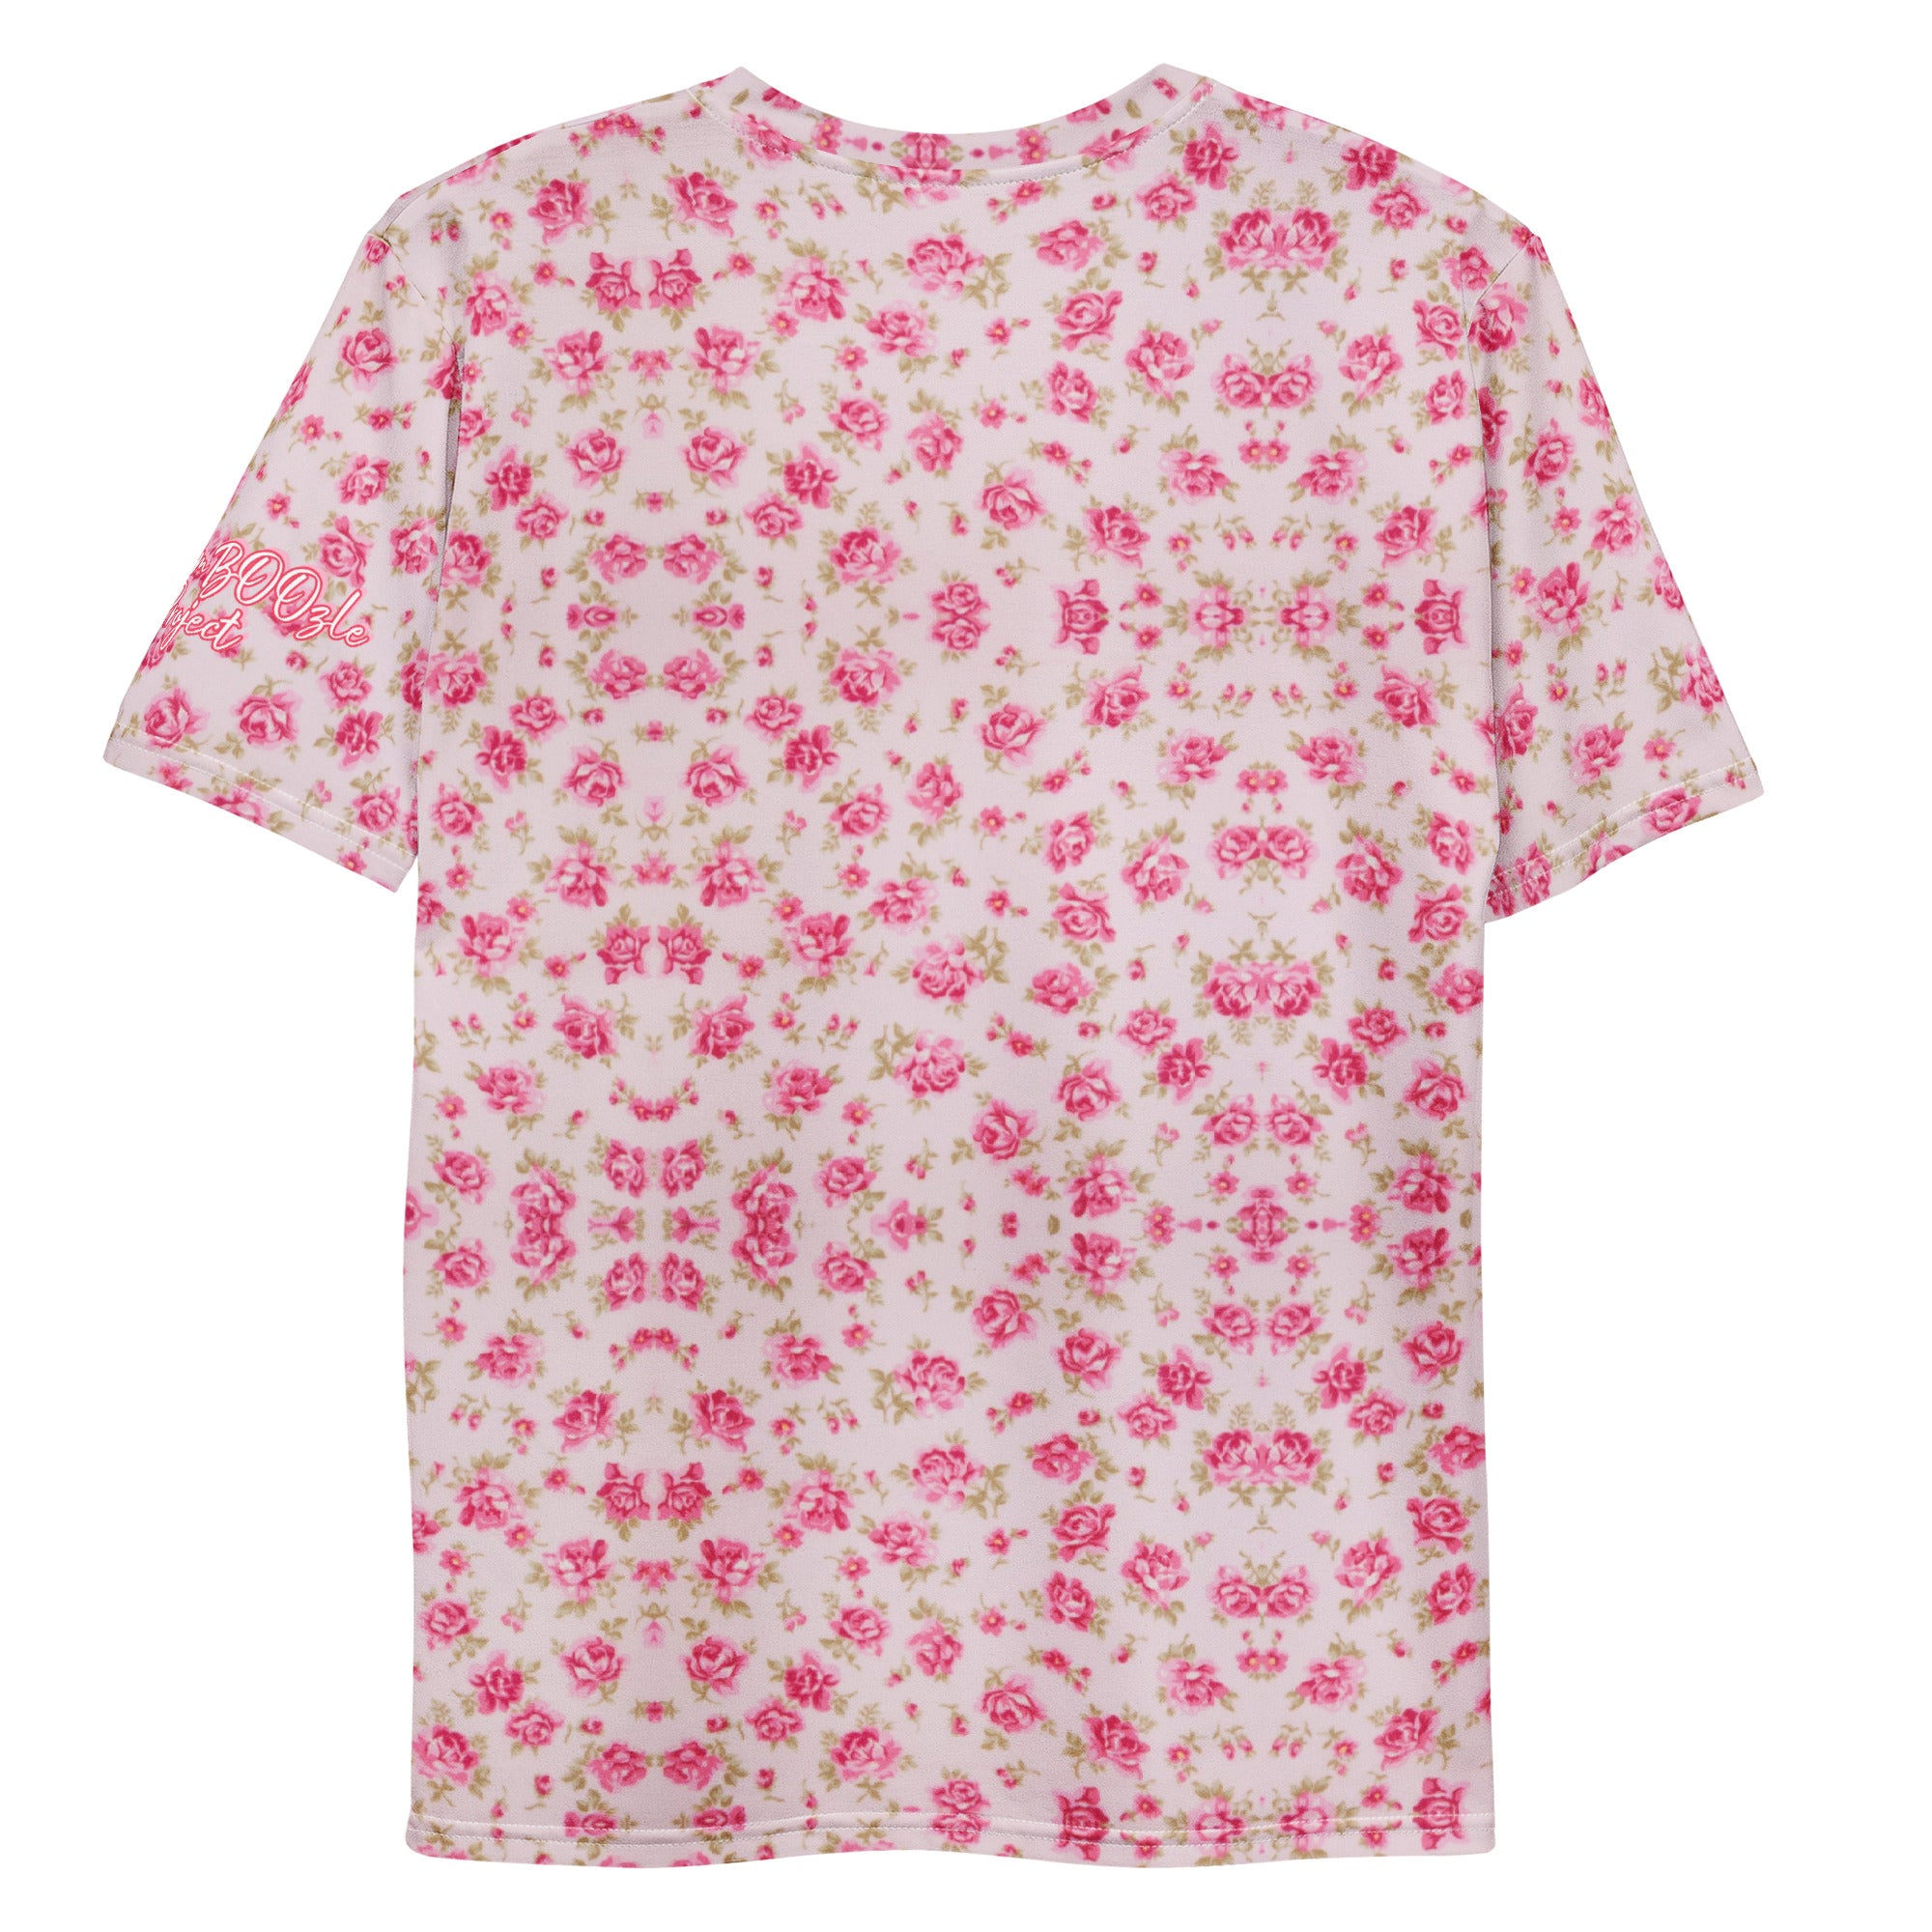 TBP Pink Floral Unisex T-shirt – The BamBoozle Project